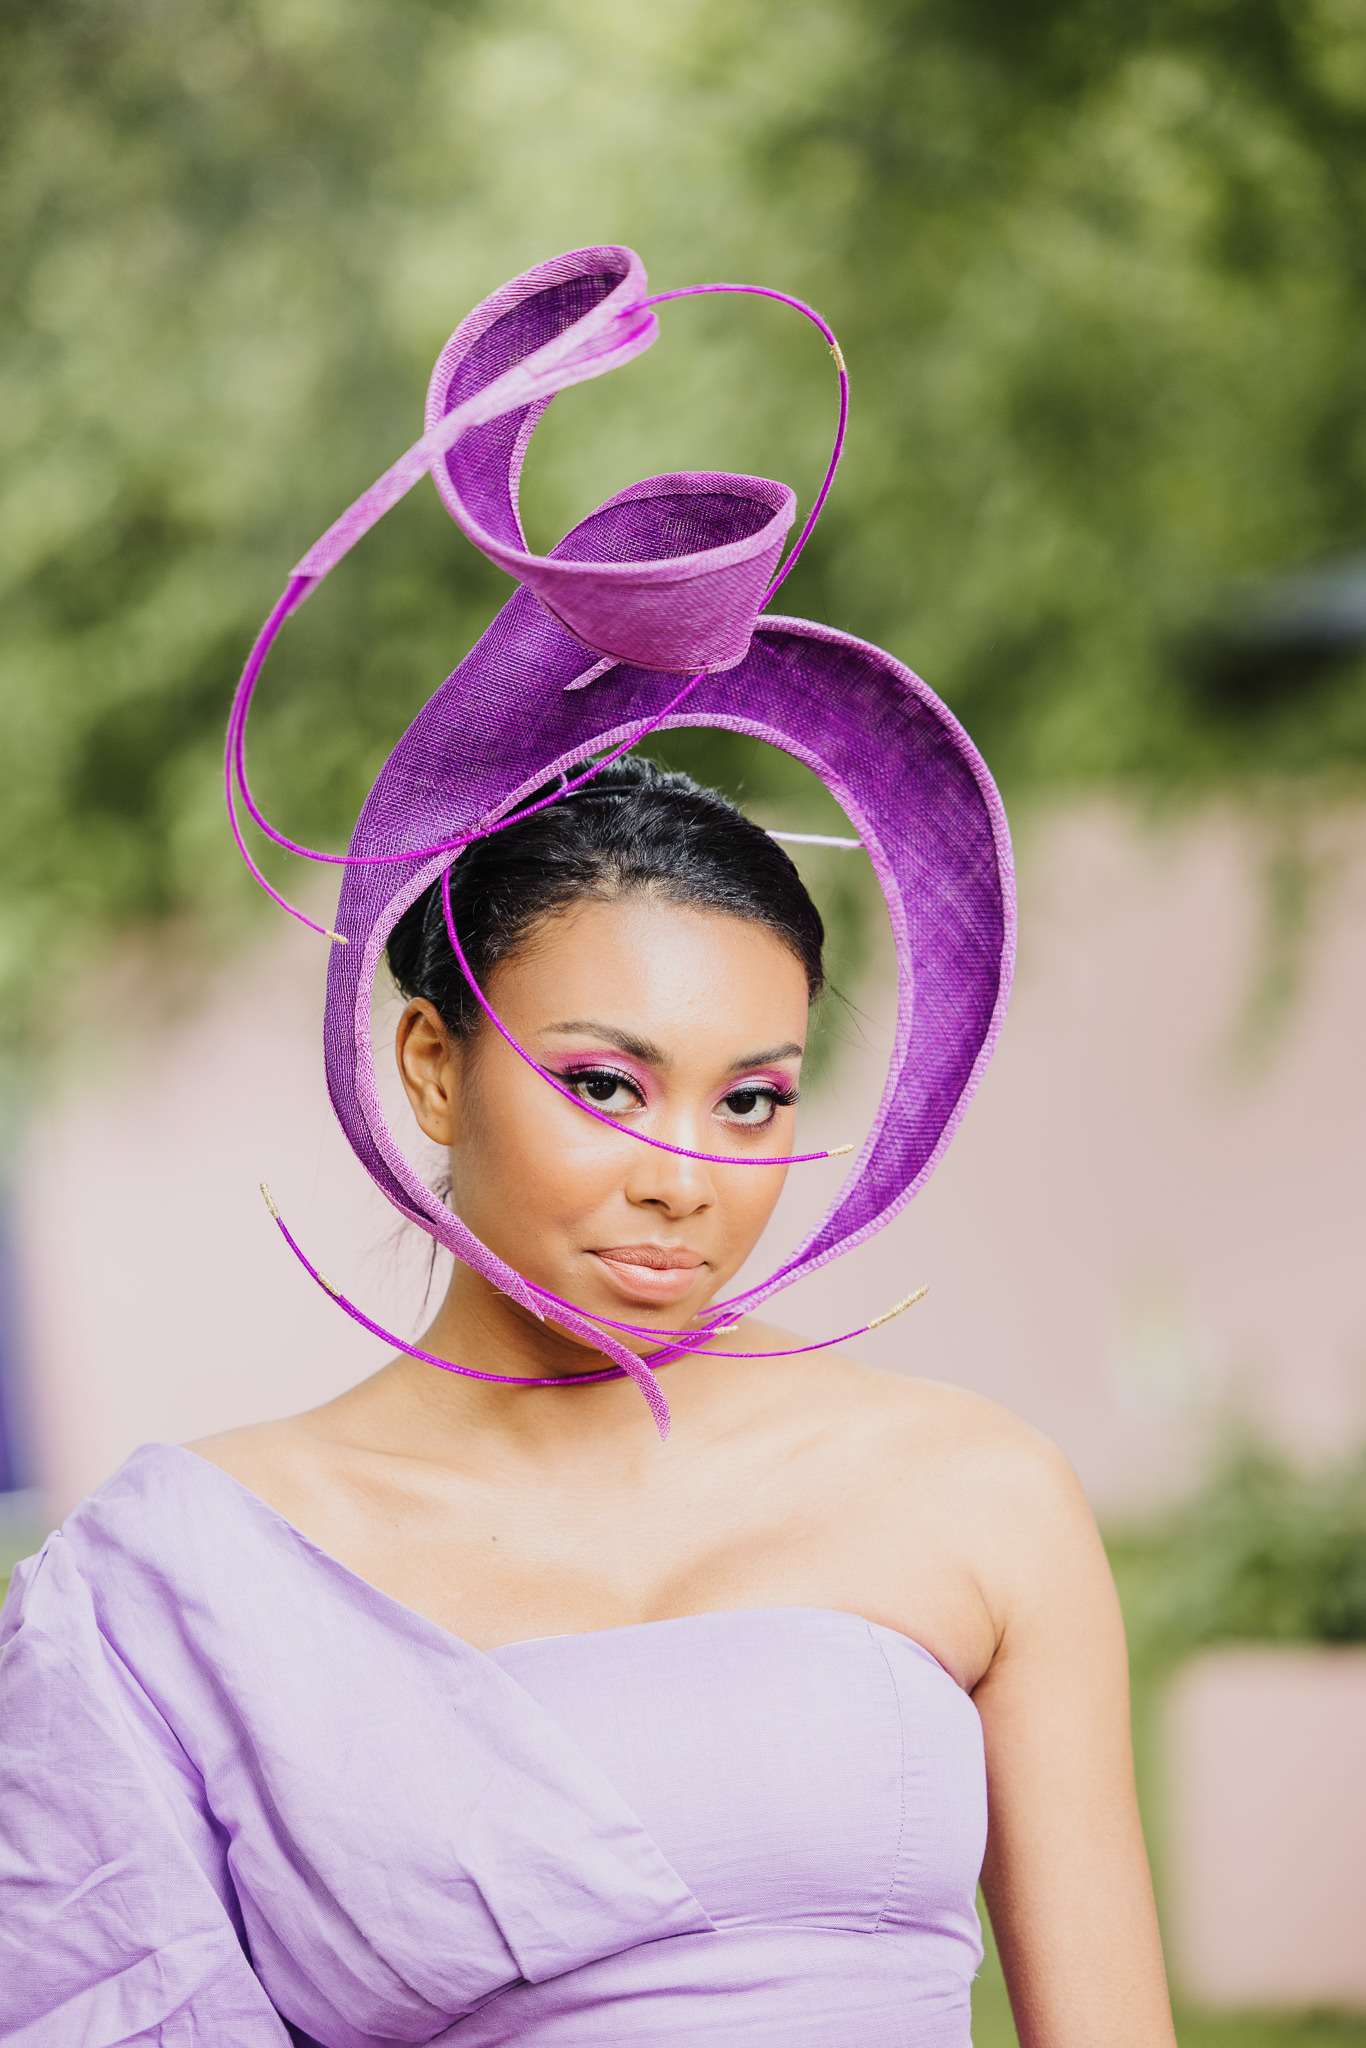 Lauda Taylor Millinery - 2022 Entry to the Millinery Award